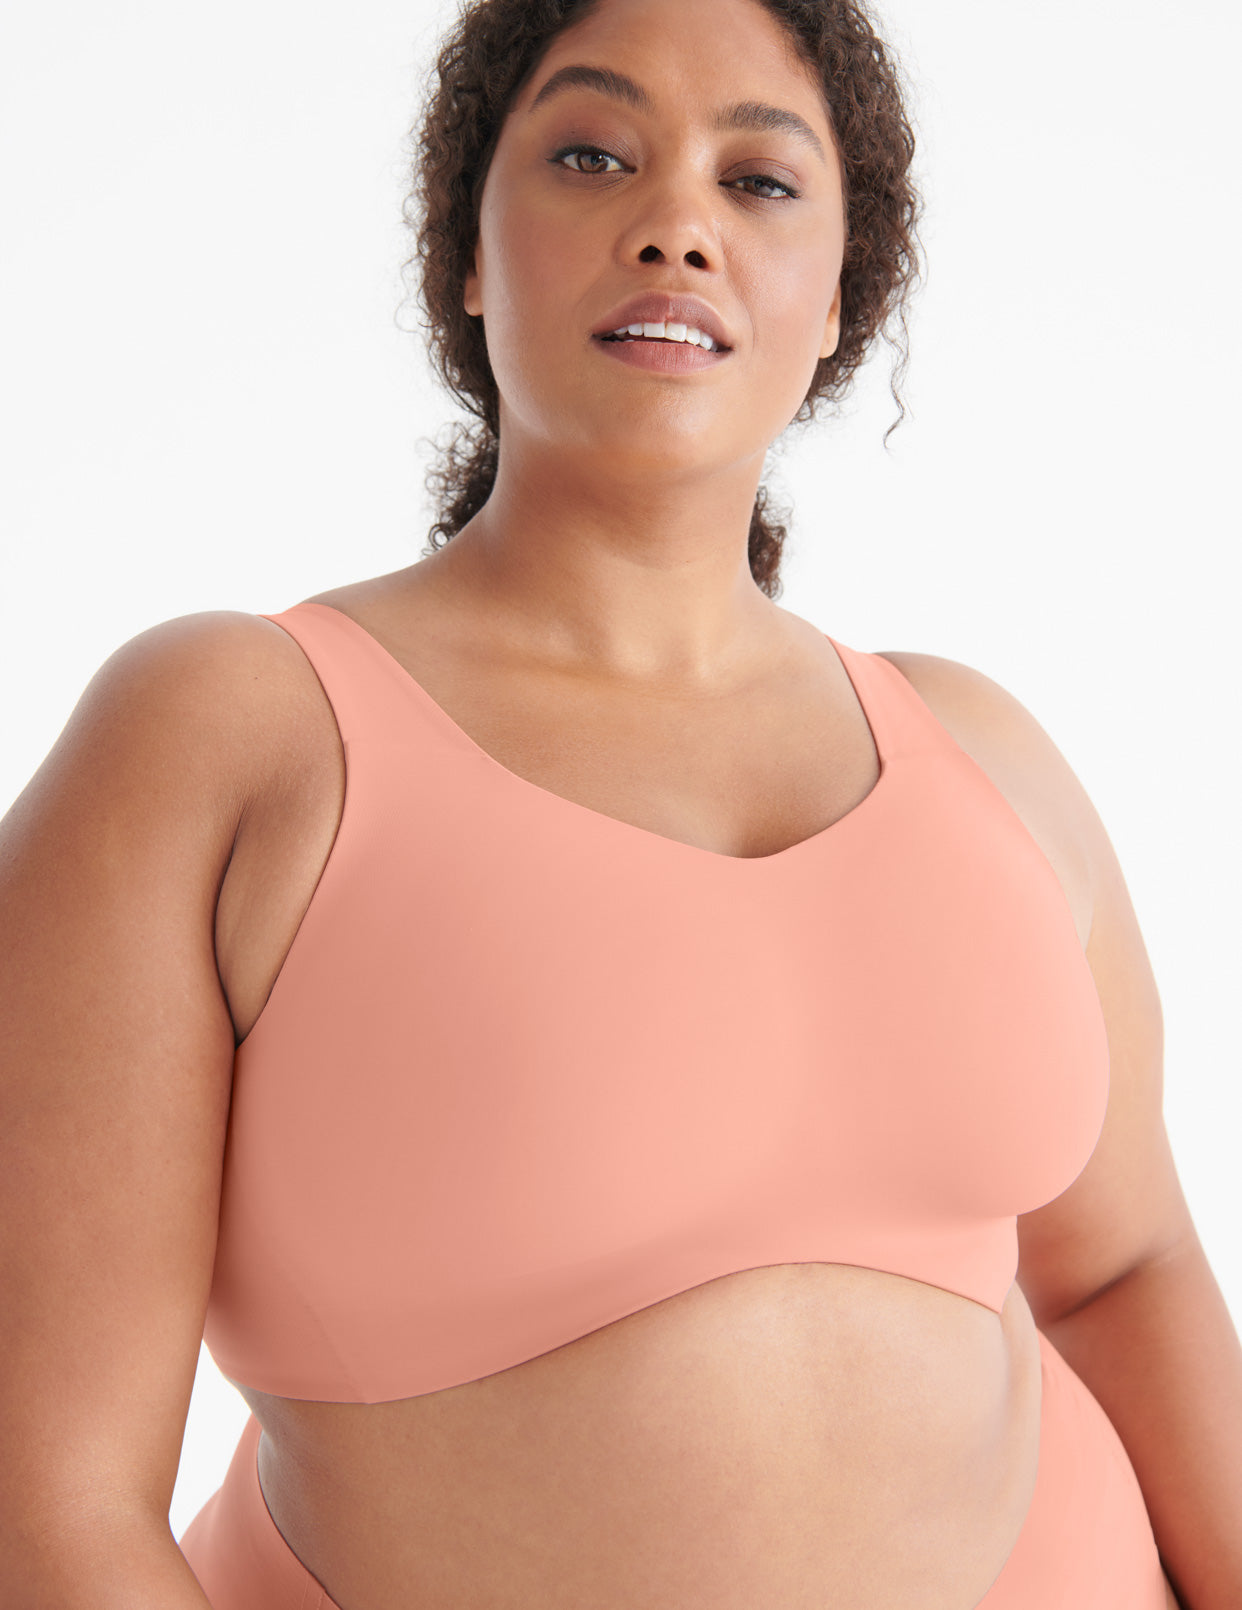 The Knix Sale Has Massive Markdowns on Bestsellers — Bras